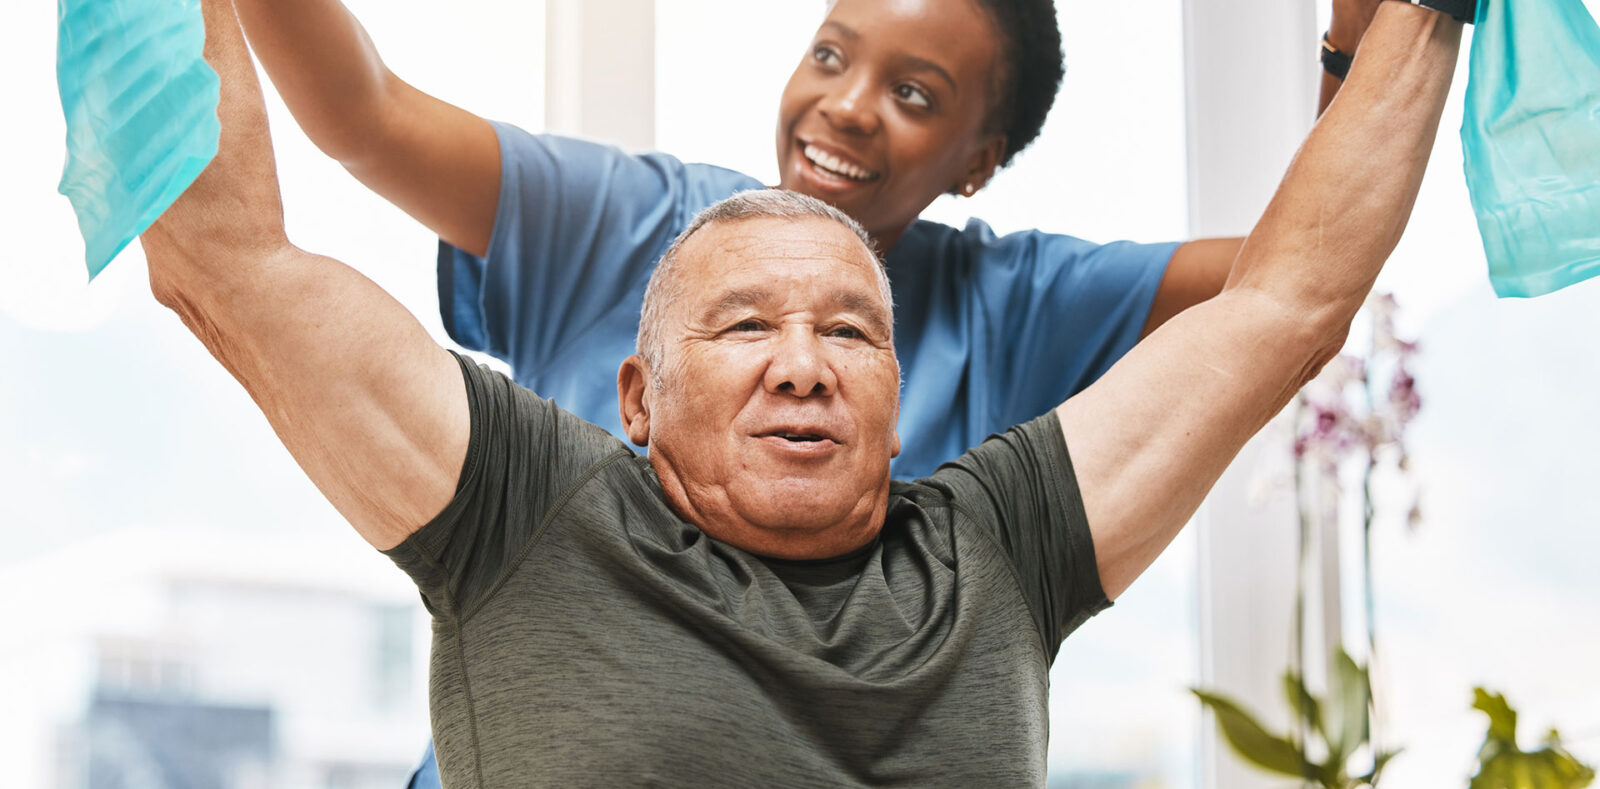 Physiotherapy help, stretching band and doctor with senior man in physical therapy, rehabilitation or healthcare support. Black woman chiropractor or physiotherapist consulting elderly patient